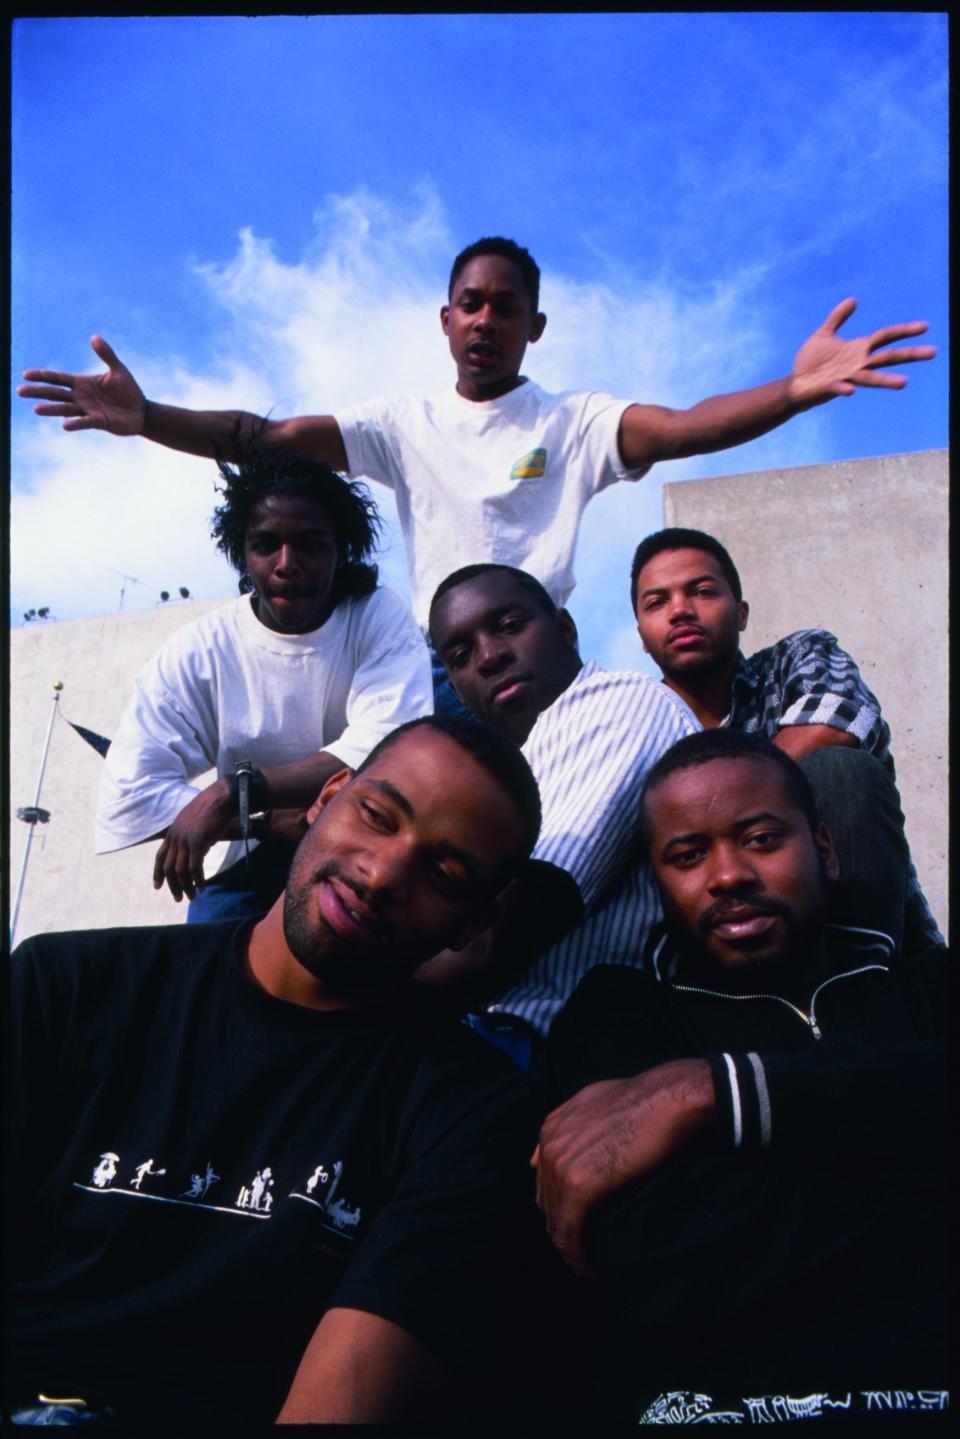 Detroit techno pioneers photographed at Hart Plaza by Normski. Clockwise from top: Derrick May, Santonio Echols, Kevin Saunderson, Juan Atkins, Eddie Fowlkes, Blake Baxter.